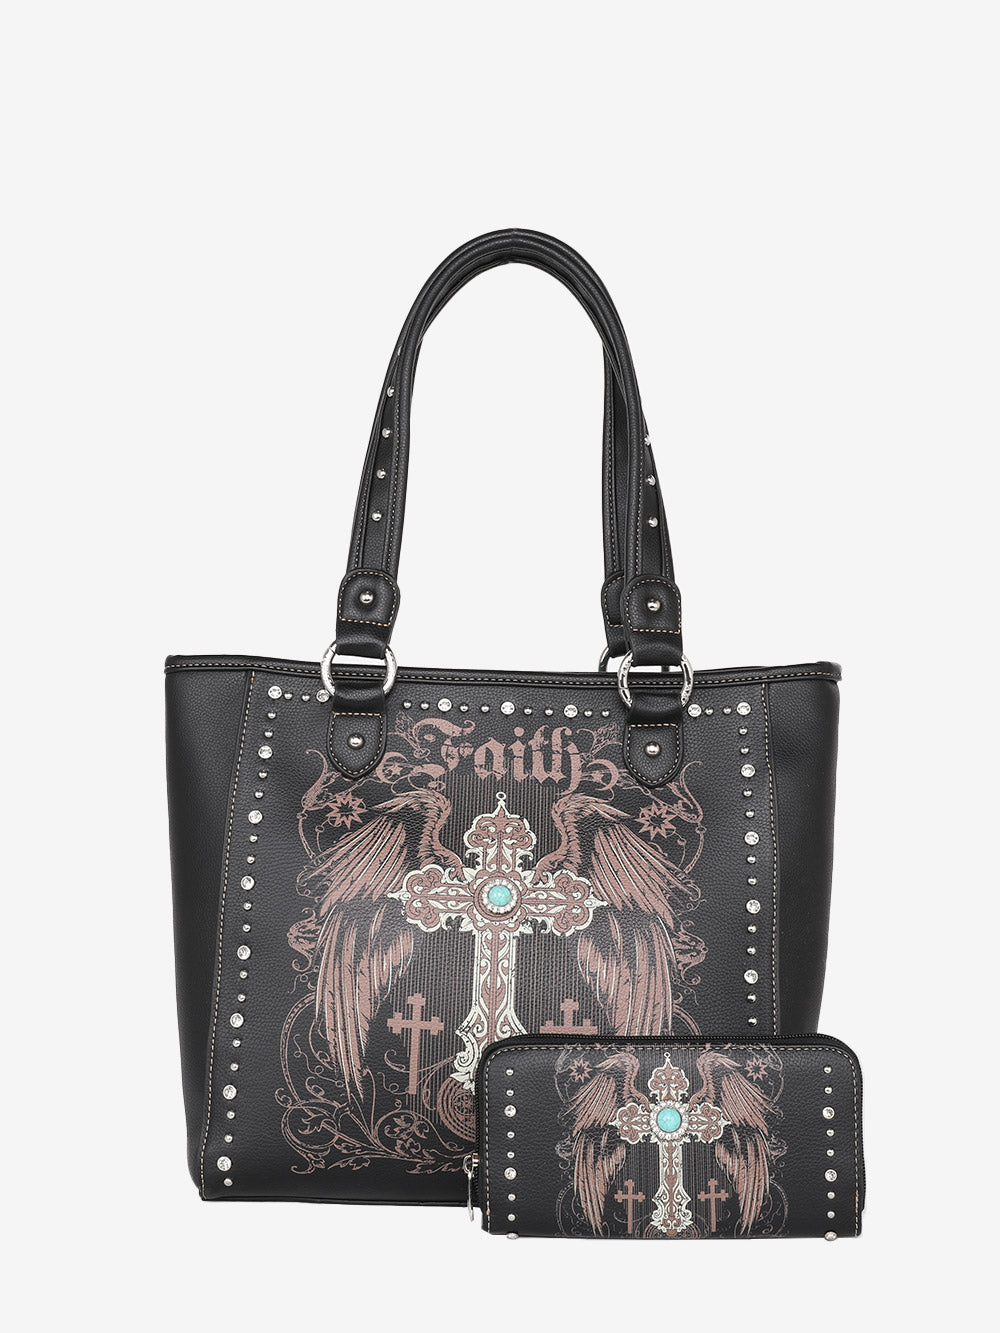 American Bling Black Spiritual Tote and Wallet Set - Montana West World